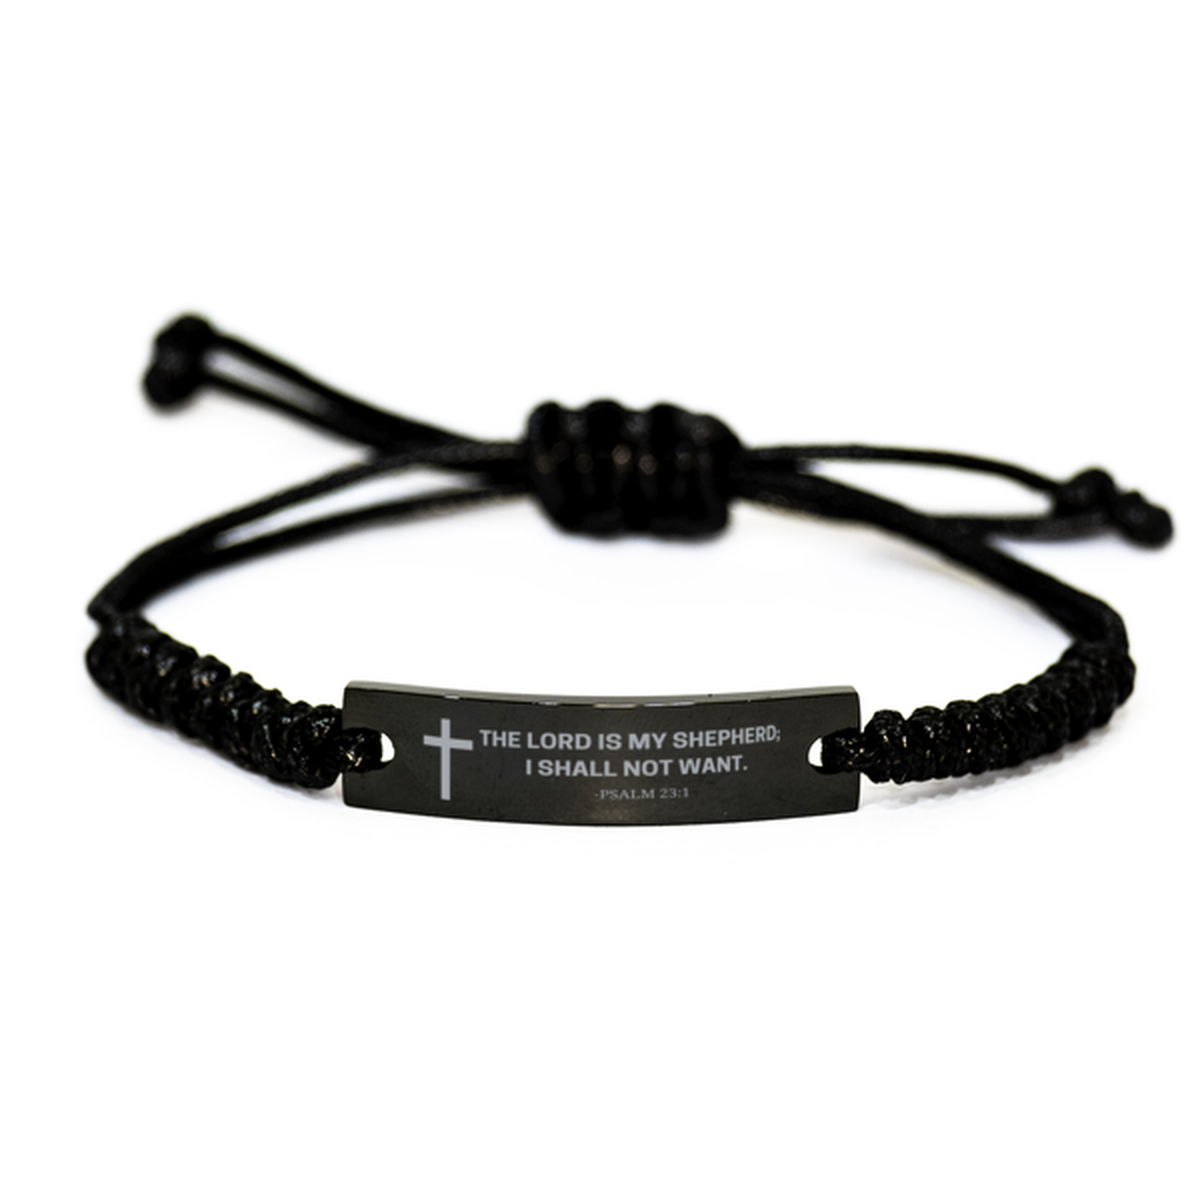 Baptism Gifts For Teenage Boys Girls, Christian Bible Verse Black Rope Bracelet, The Lord is my shepherd, Catholic Confirmation Gifts for Son, Godson, Grandson, Nephew